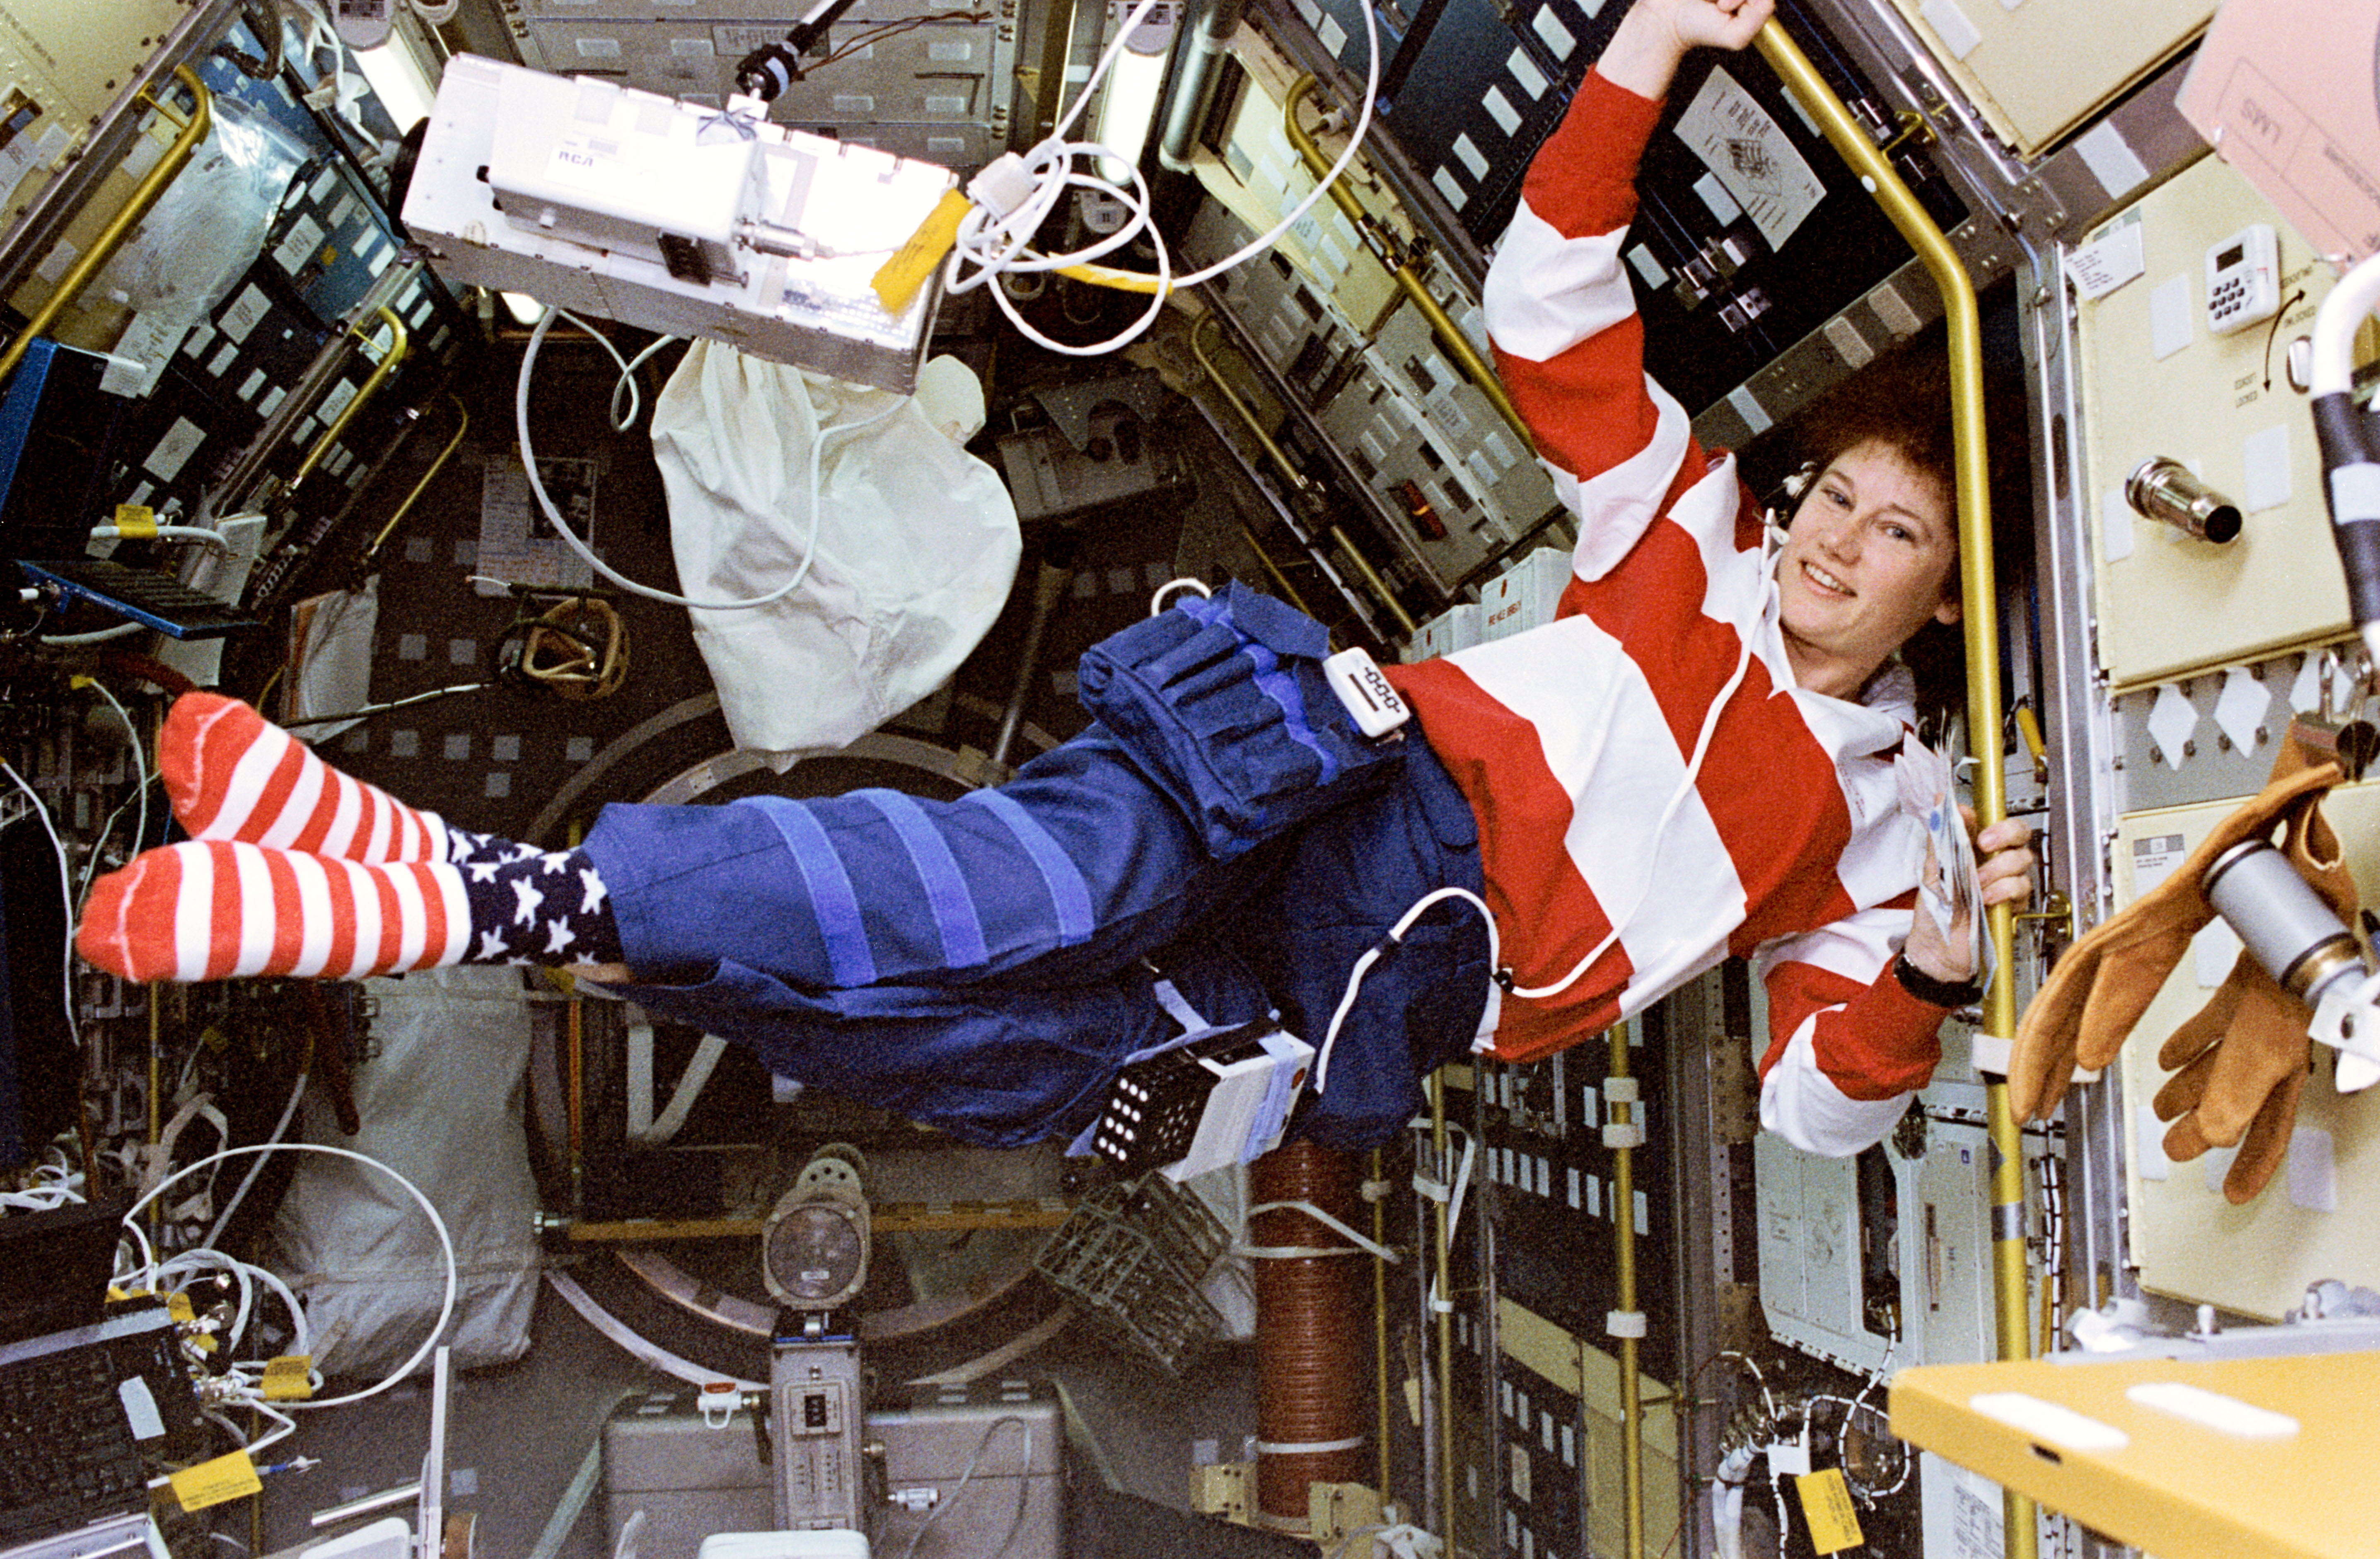 Susan J. Helms in the Spacelab module during the STS-78 mission